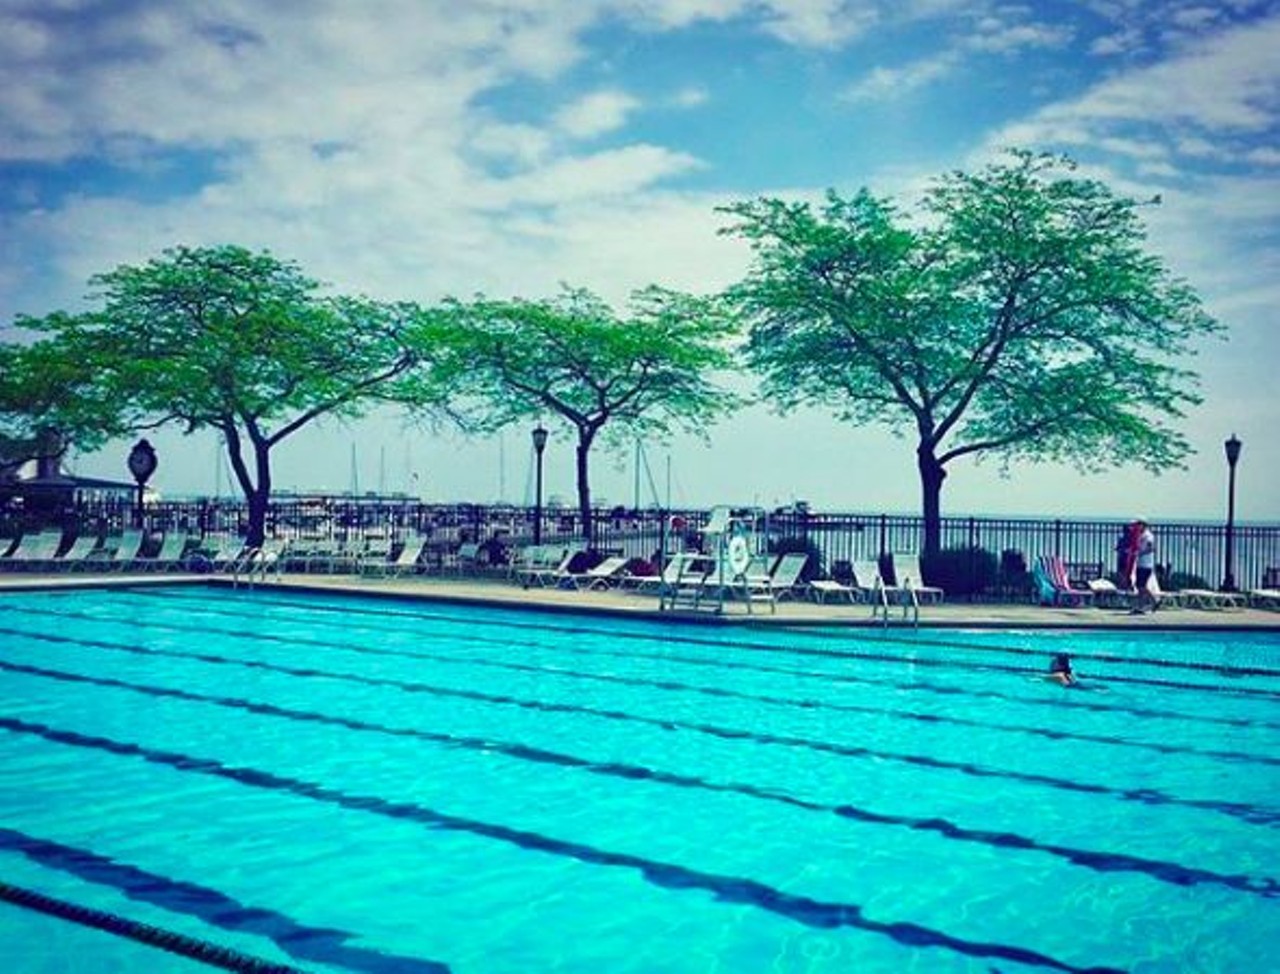 Pier Park 
350 Lake Shore Rd., Grosse Pointe Farms 
Pier Park is occupied by two designated pools, the wading pool for children, and the large pool, consisting of three different areas.
Photo via @faresksebati / Instagram 